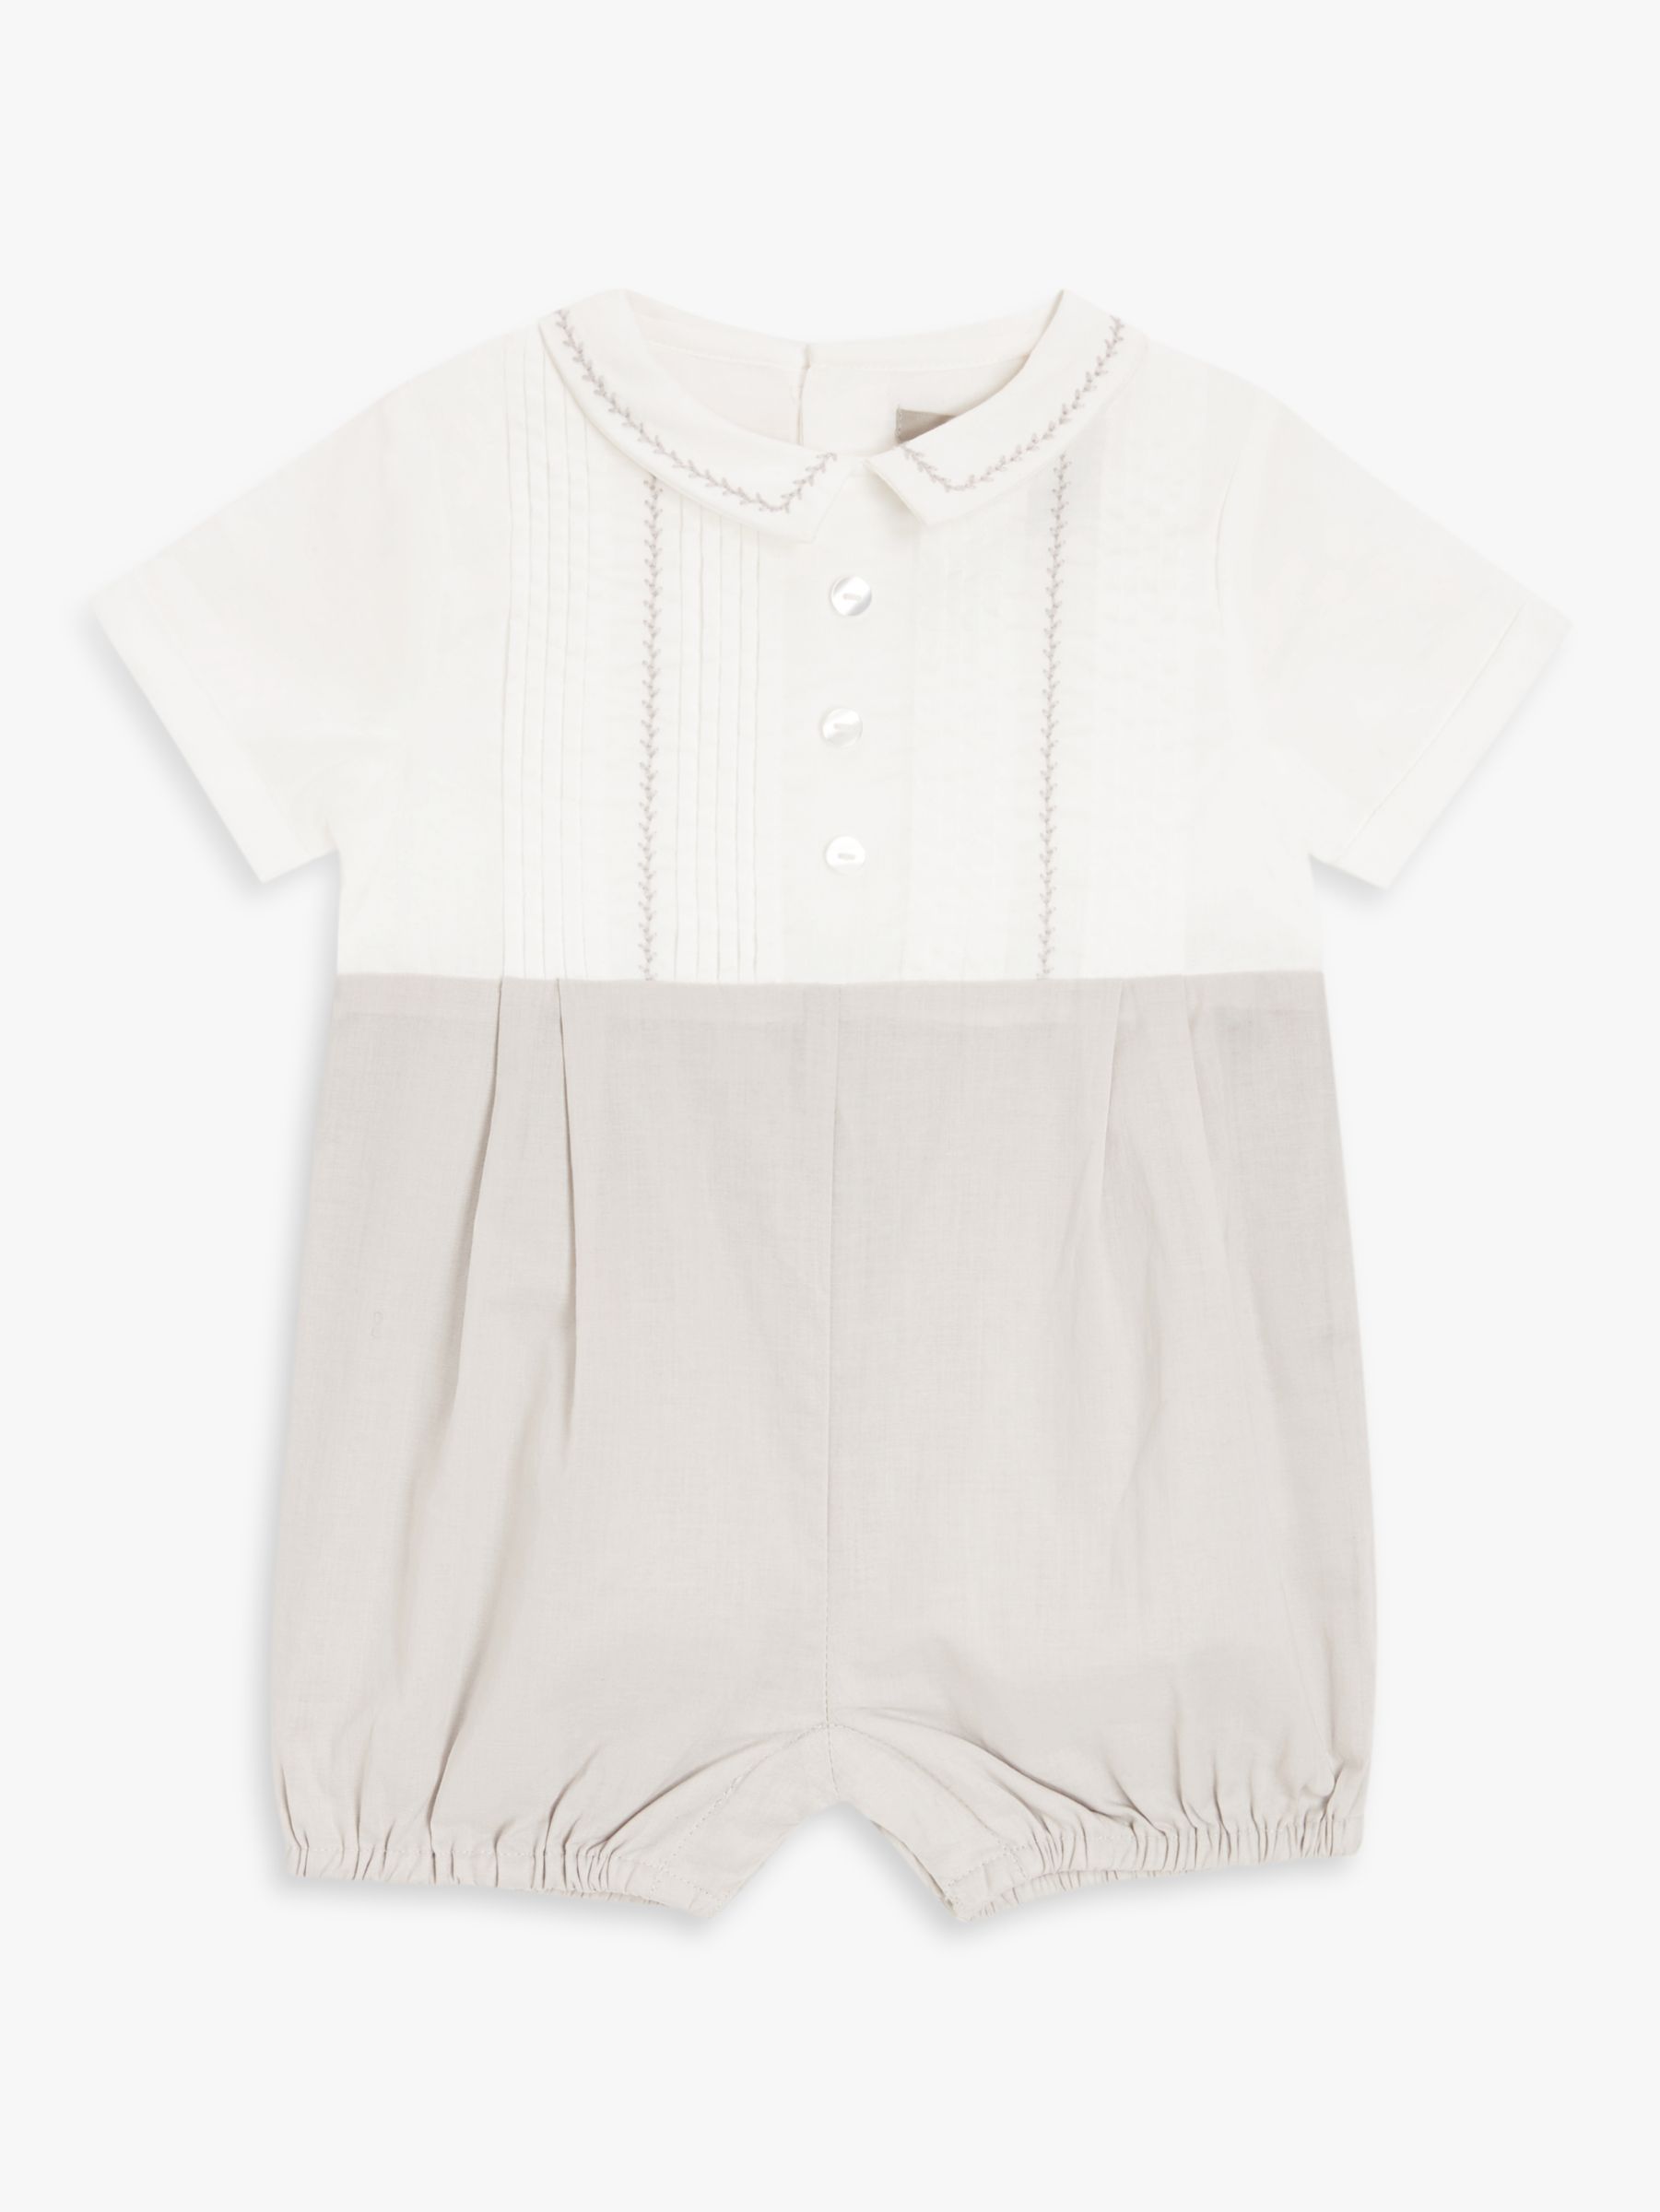 John Lewis Heirloom Collection Baby Linen Romper, White, 12-18 months